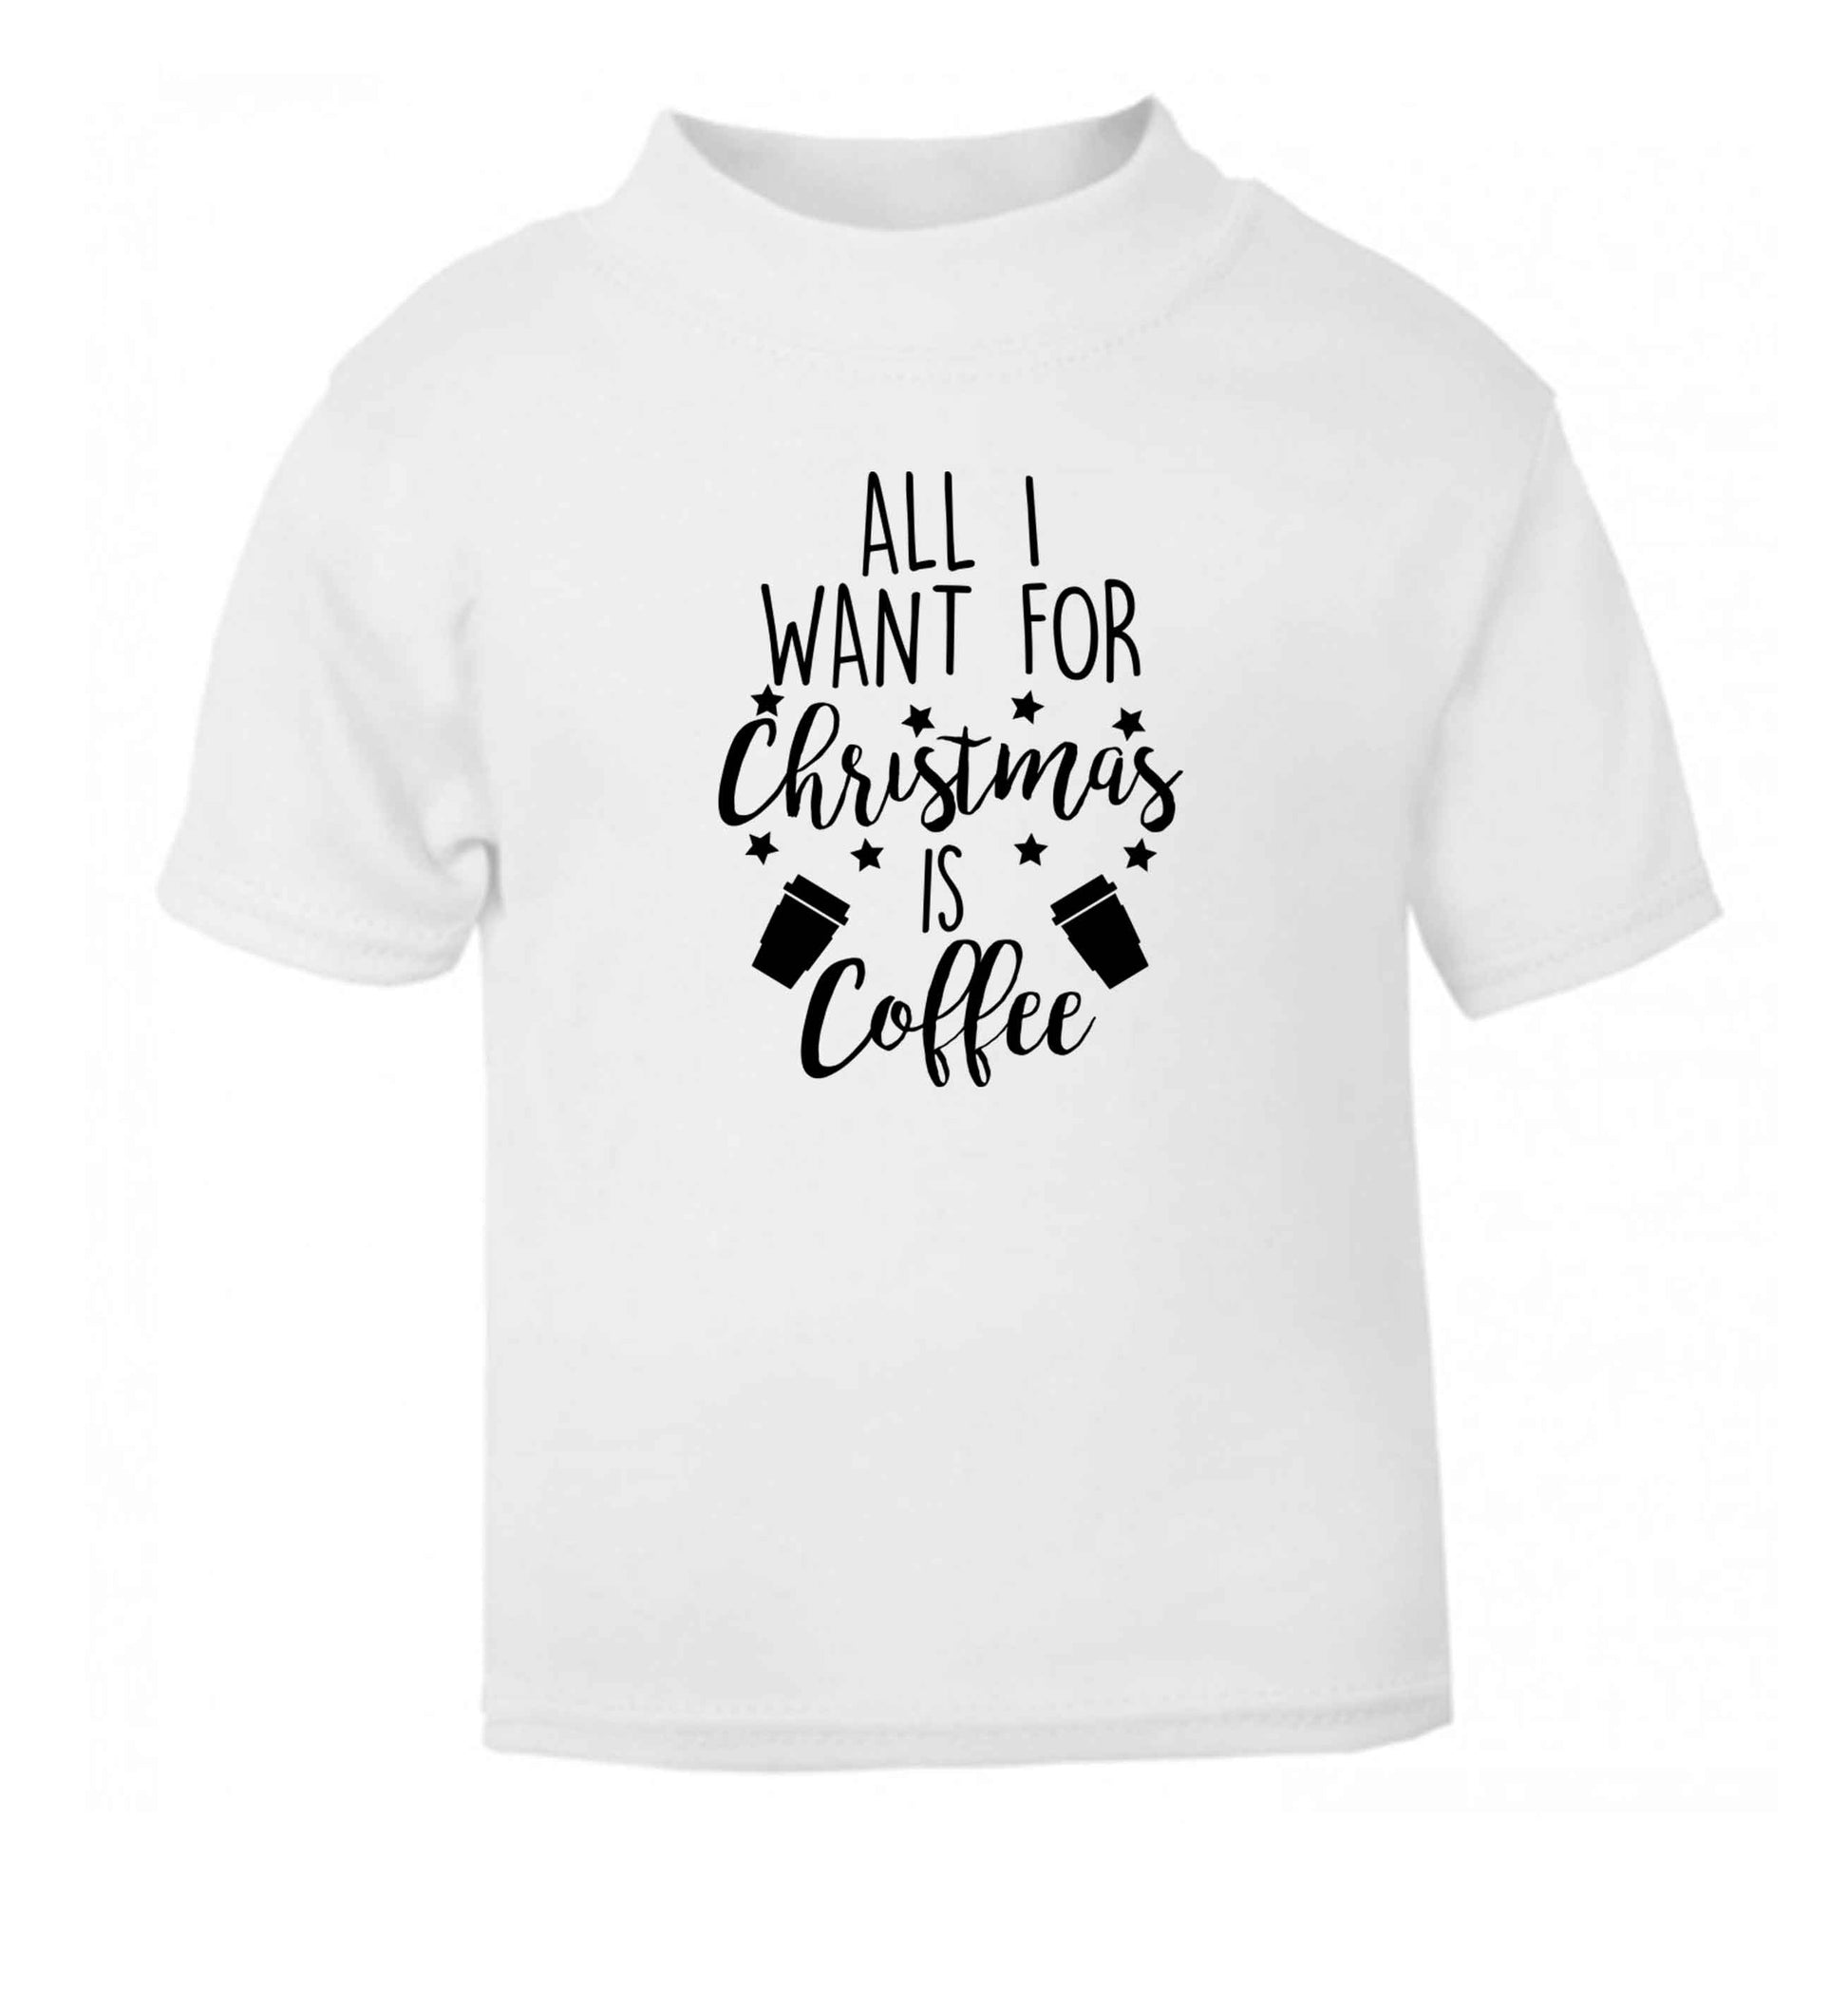 All I want for Christmas is coffee white Baby Toddler Tshirt 2 Years